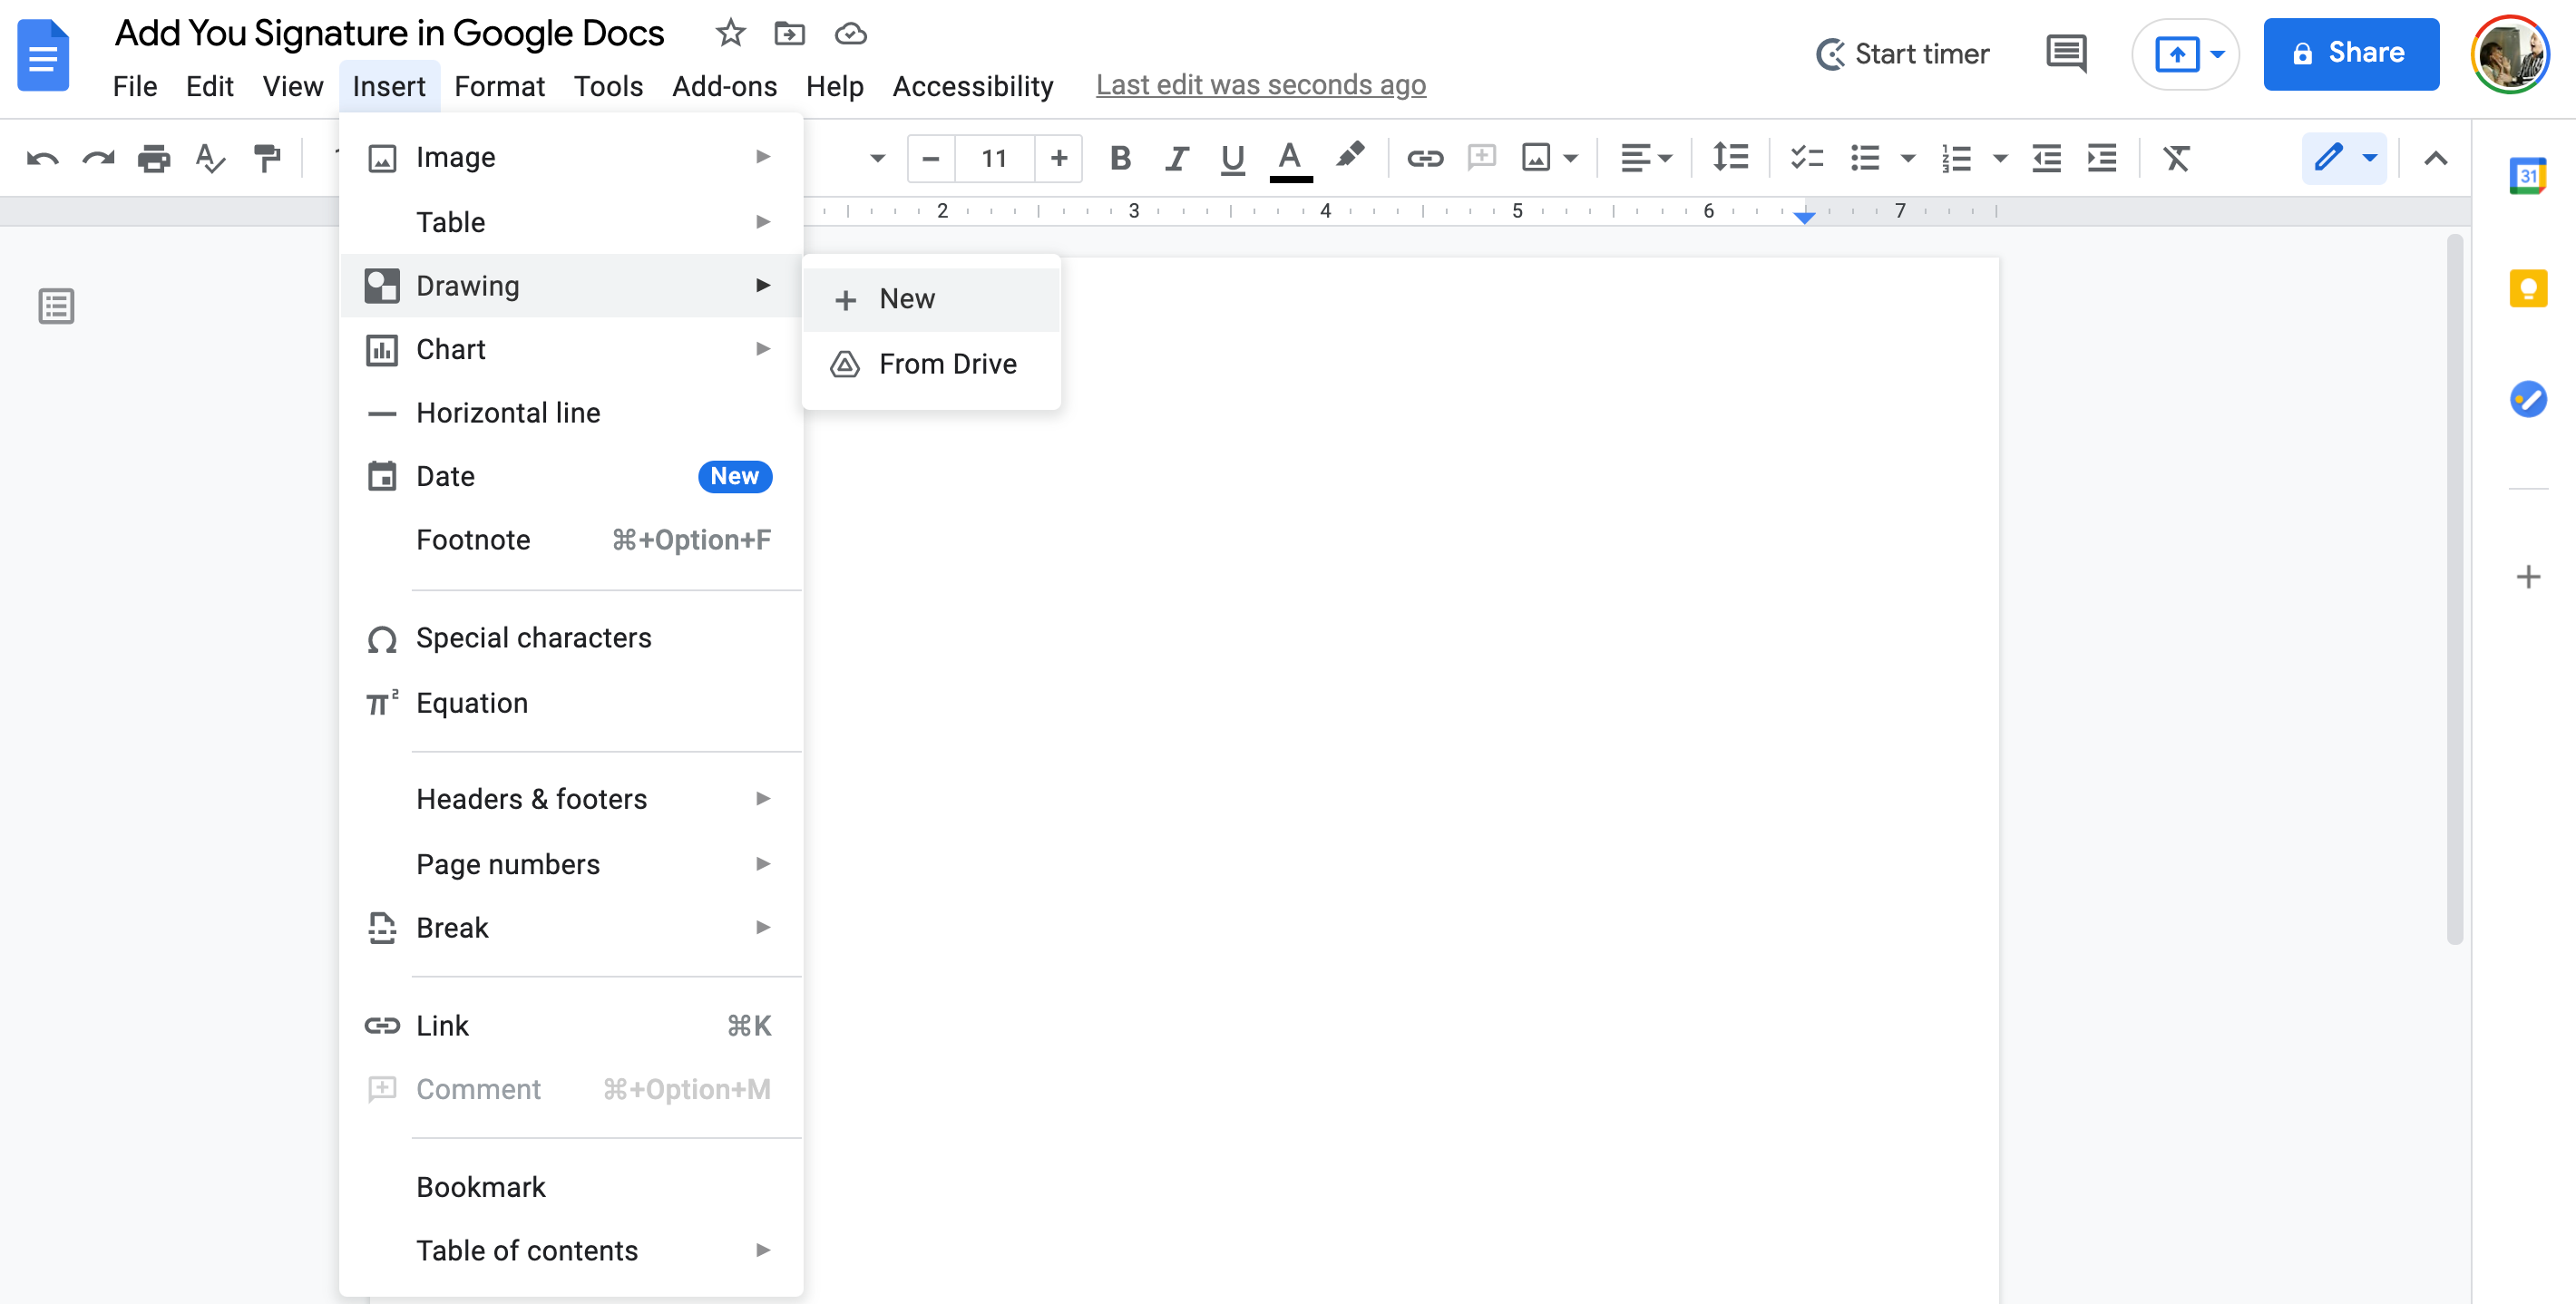 How to Add a Signature to Google Docs